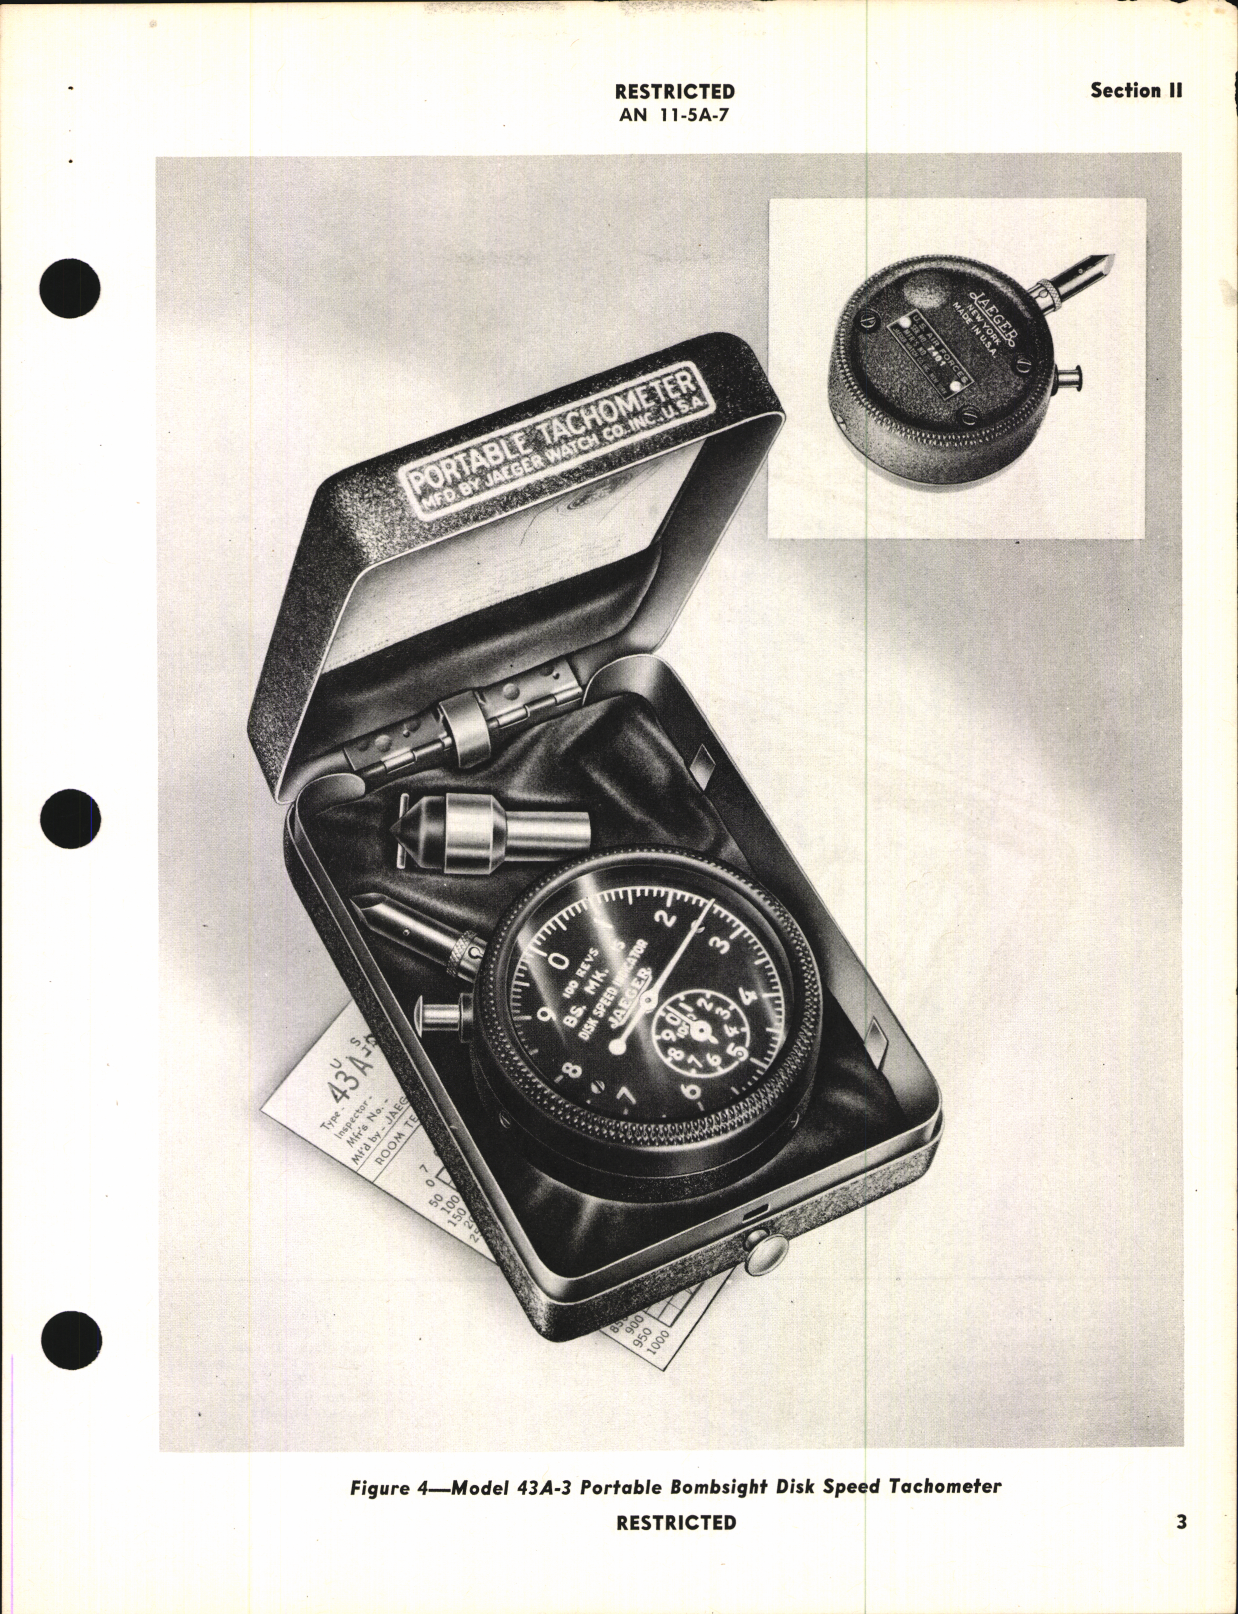 Sample page 7 from AirCorps Library document: Operation, Service, & Overhaul Instructions with Parts Catalog for Portable Bombsight Disk Speed Tachometer